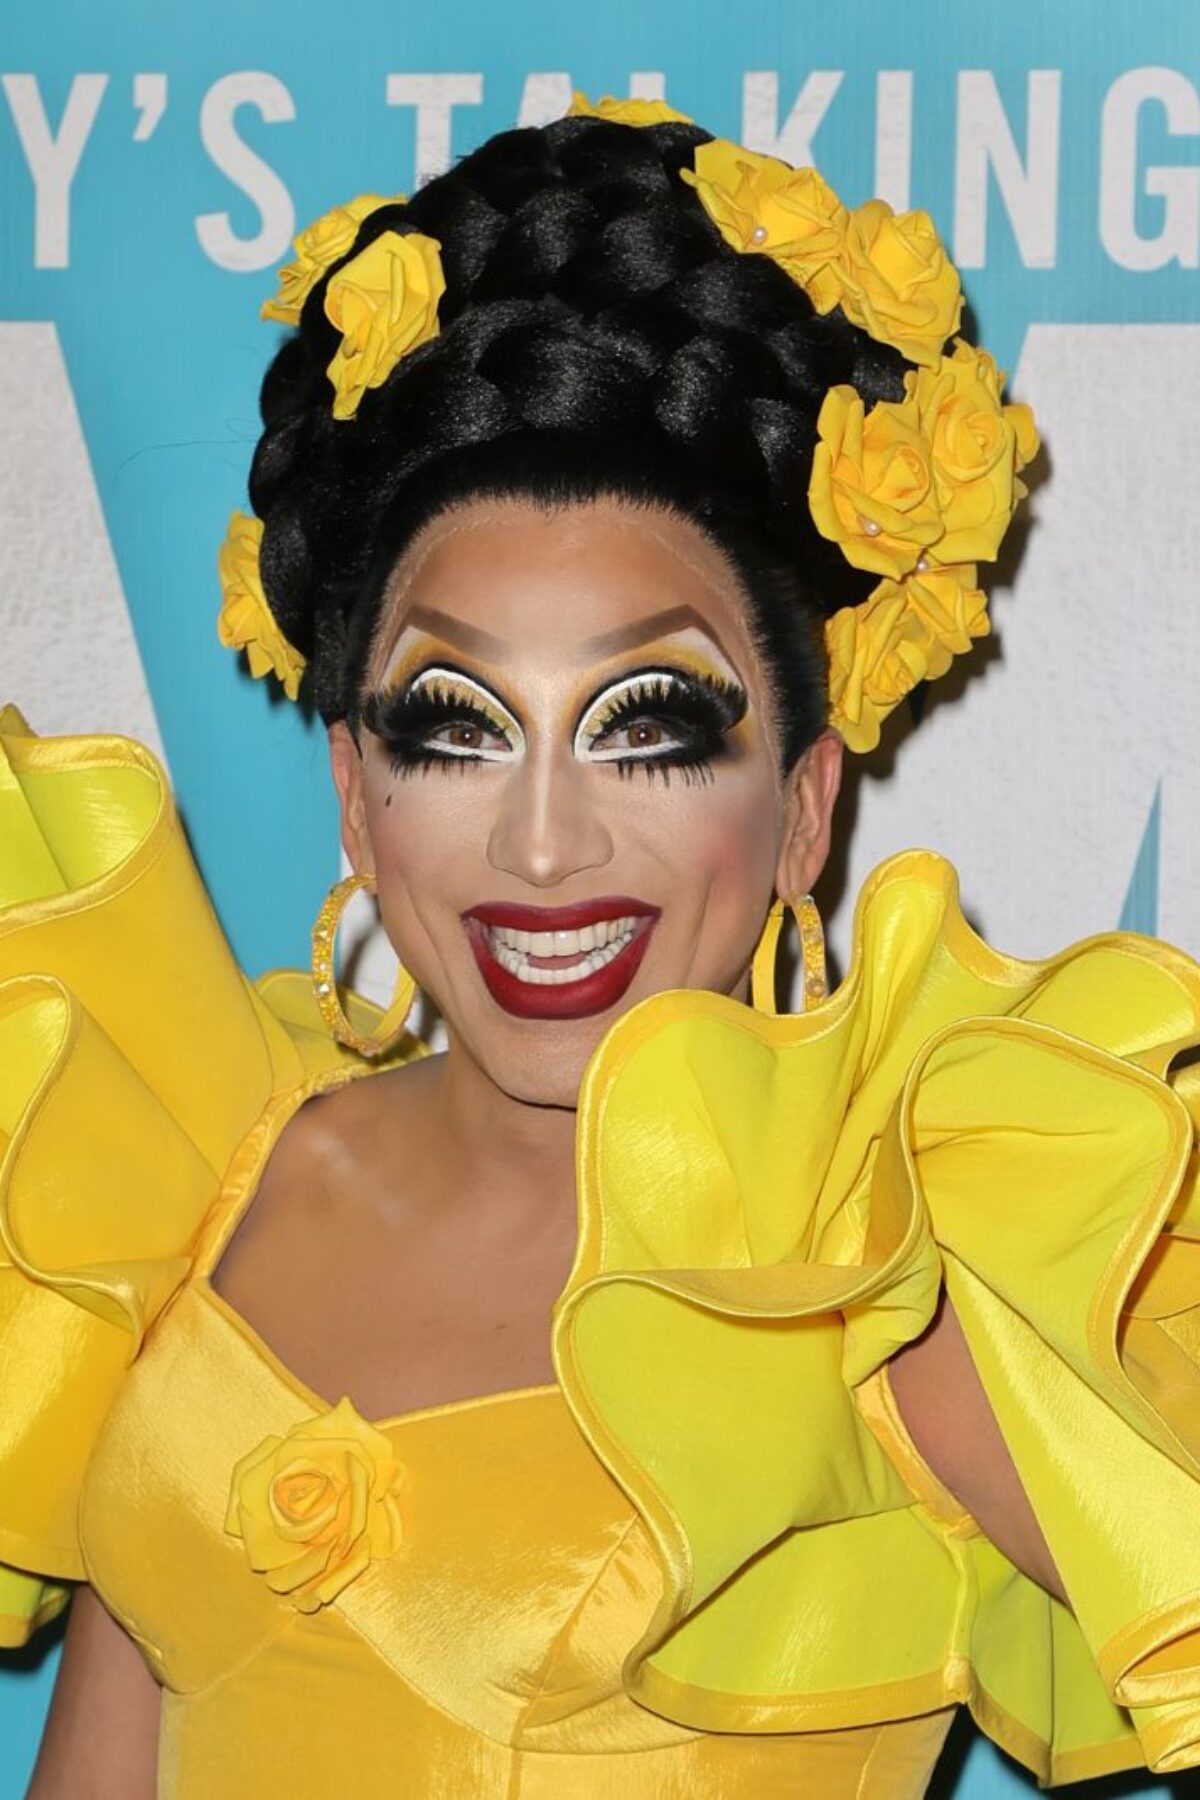 LOS ANGELES, CALIFORNIA - JANUARY 21: Bianca Del Rio attends the Opening Night Performance of 